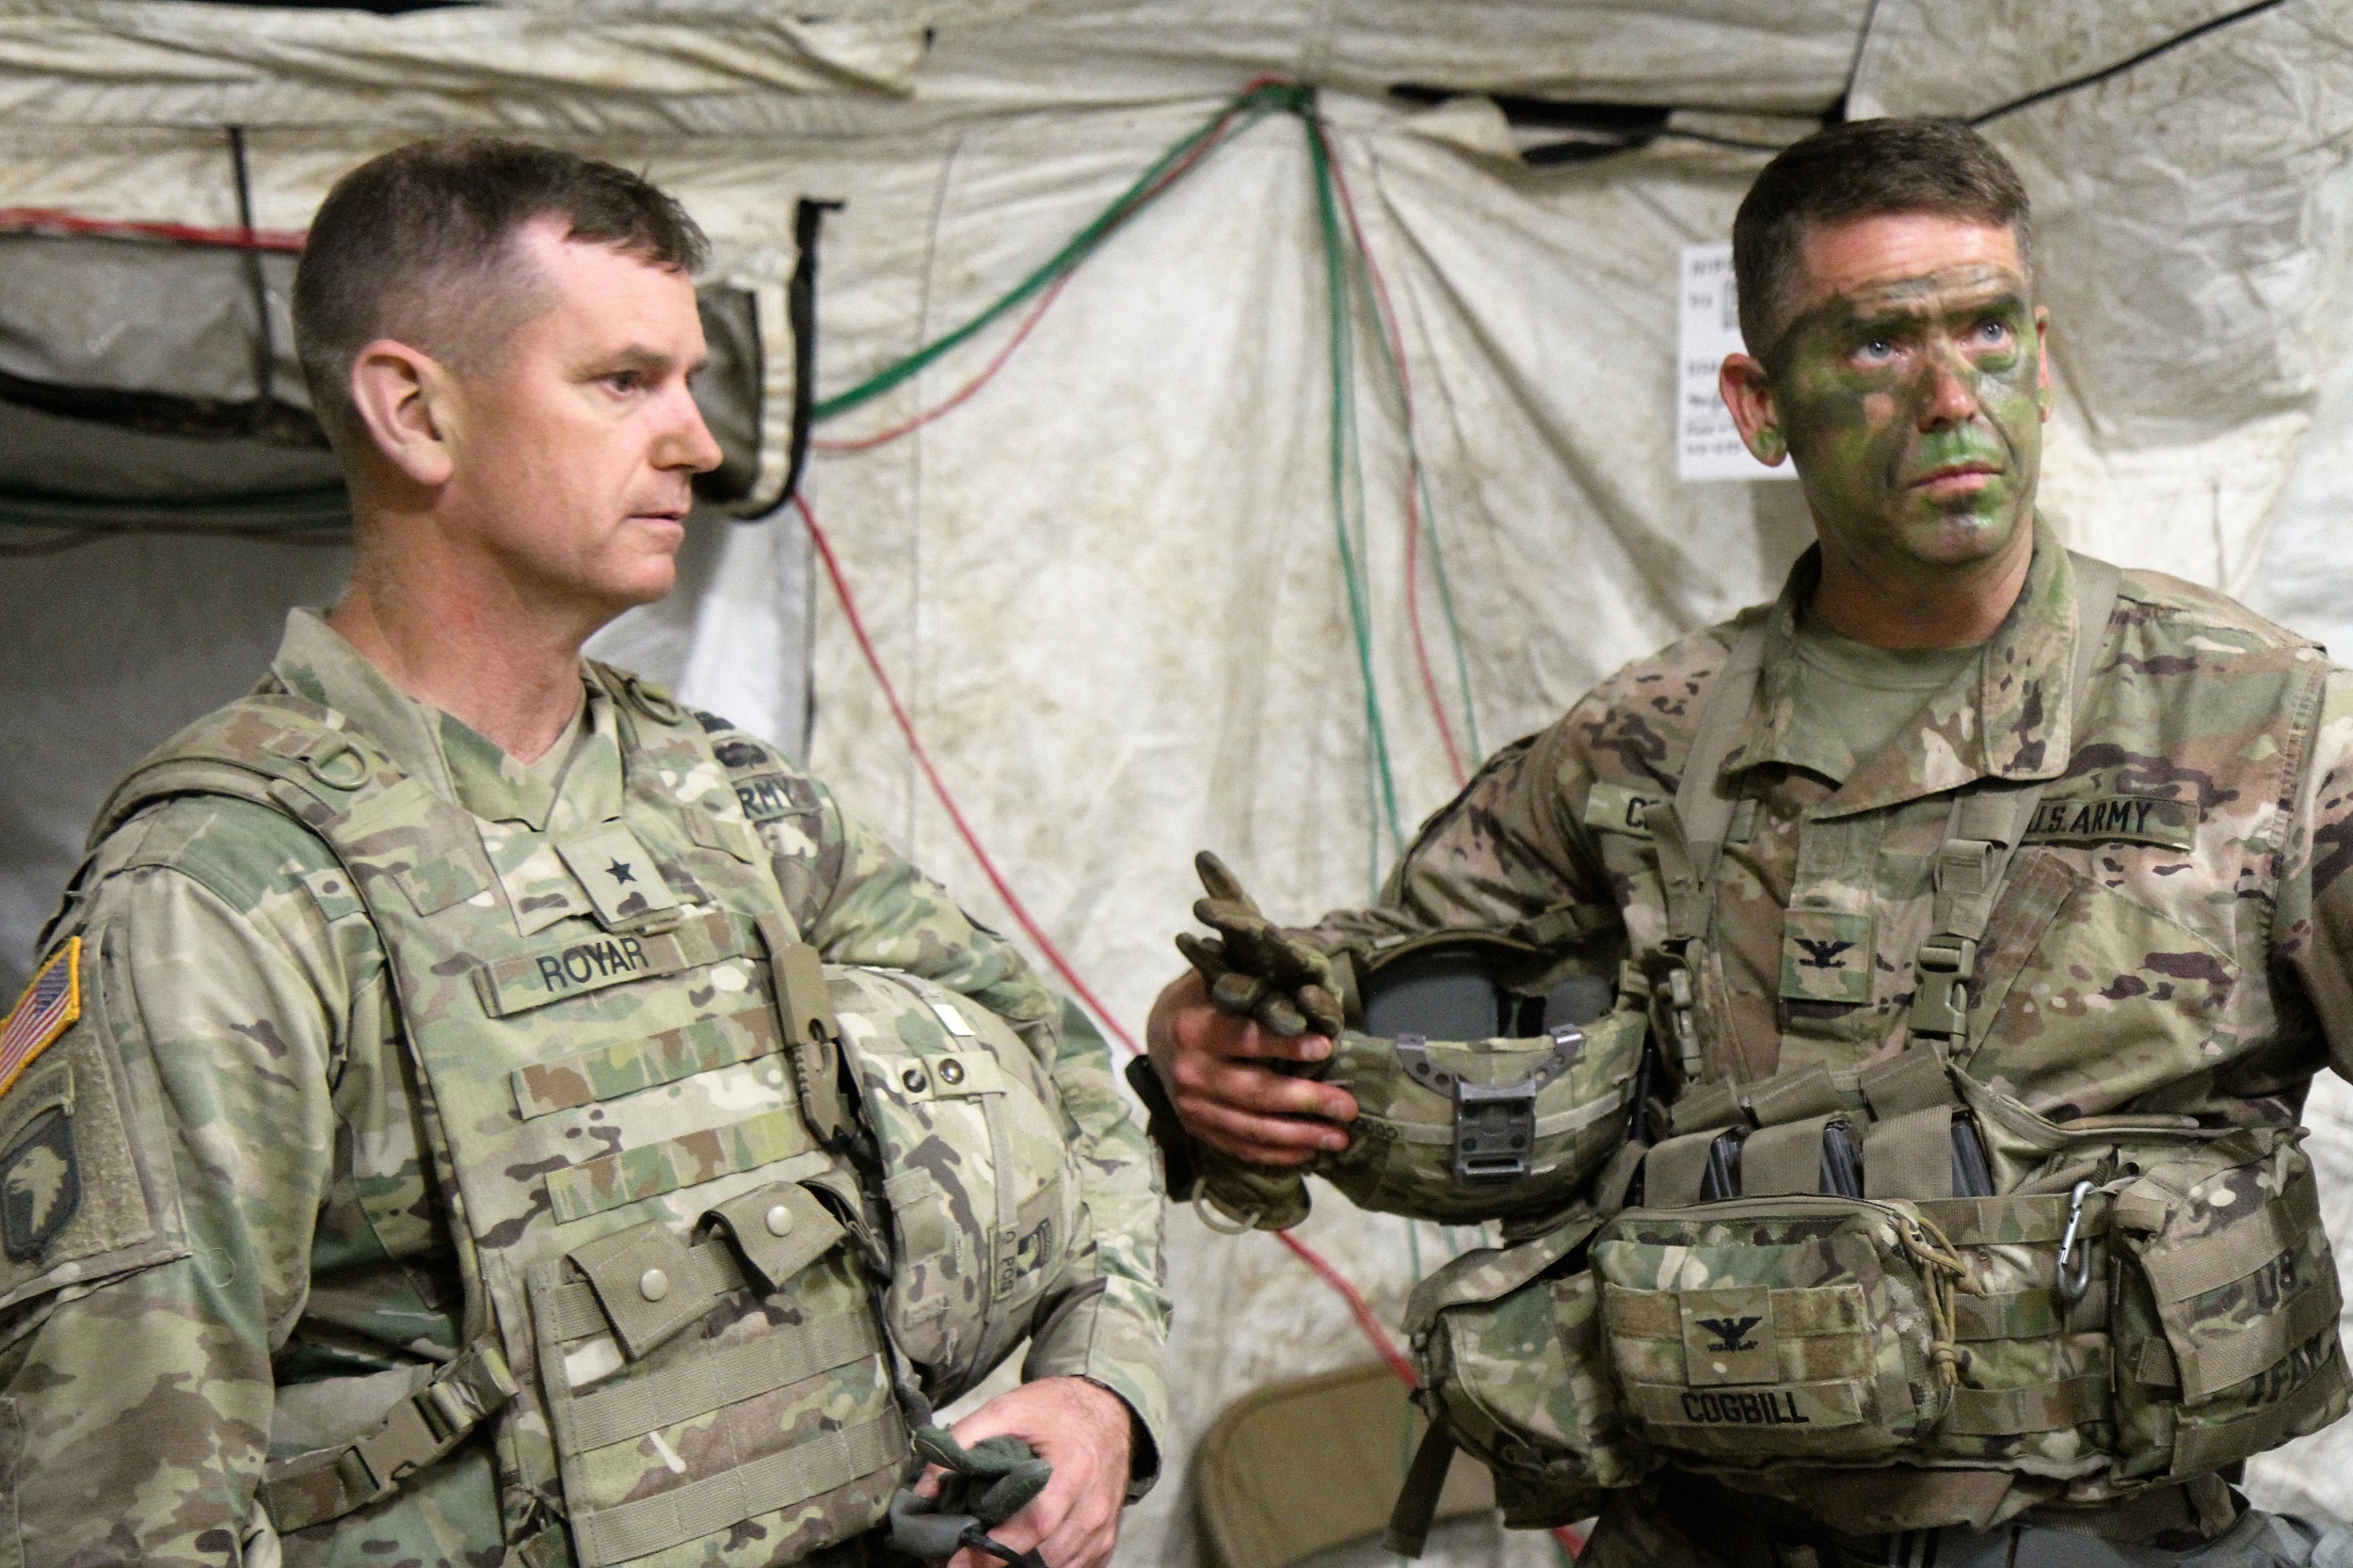 Col. John Cogbill (right) and Brig. Gen. K. Todd Royar, the 101st Airborne Division Deputy Commanding General, Support, discuss 3BCT training inside the 3BCT Tactical Operations Center (TOC). The TOC is the location where the 3BCT Headquarters and Staff conduct battle tracking and mission planning when deployed during training events and tactical operations. (U.S. Army Photo by Staff Sgt. Cody Harding - taken May 10, 2018).